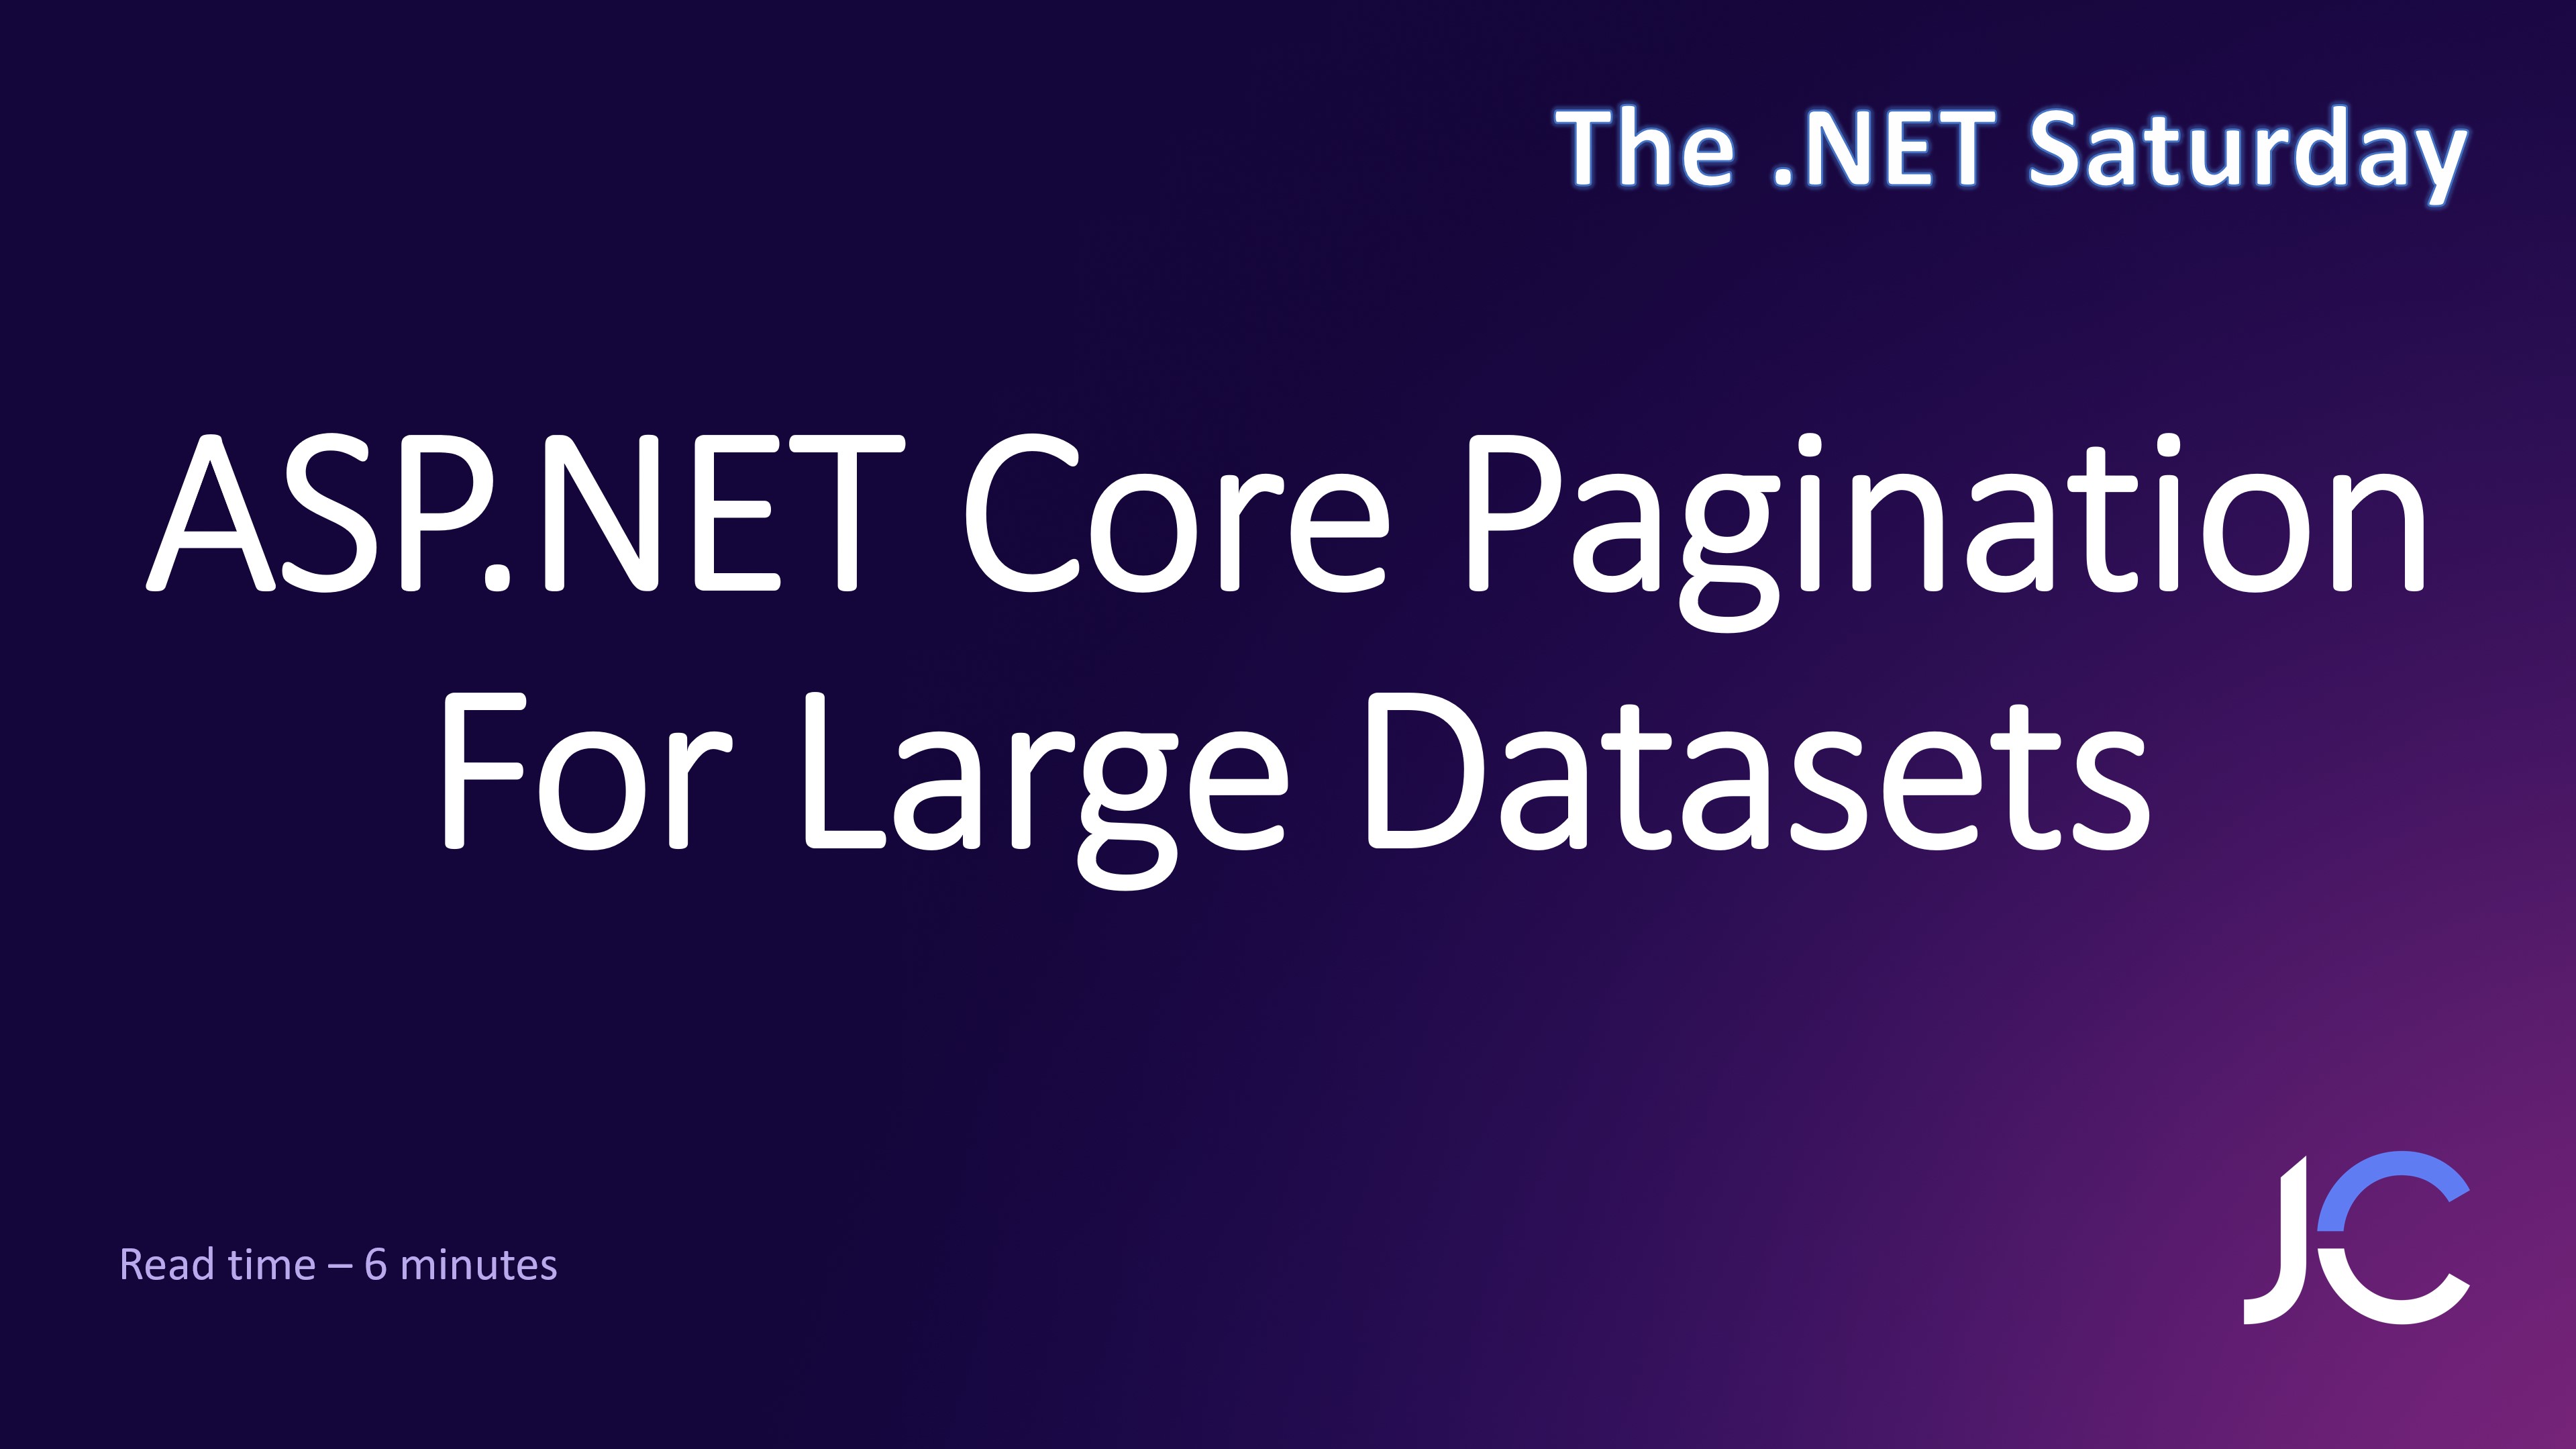 ASP.NET Core Pagination For Large Datasets